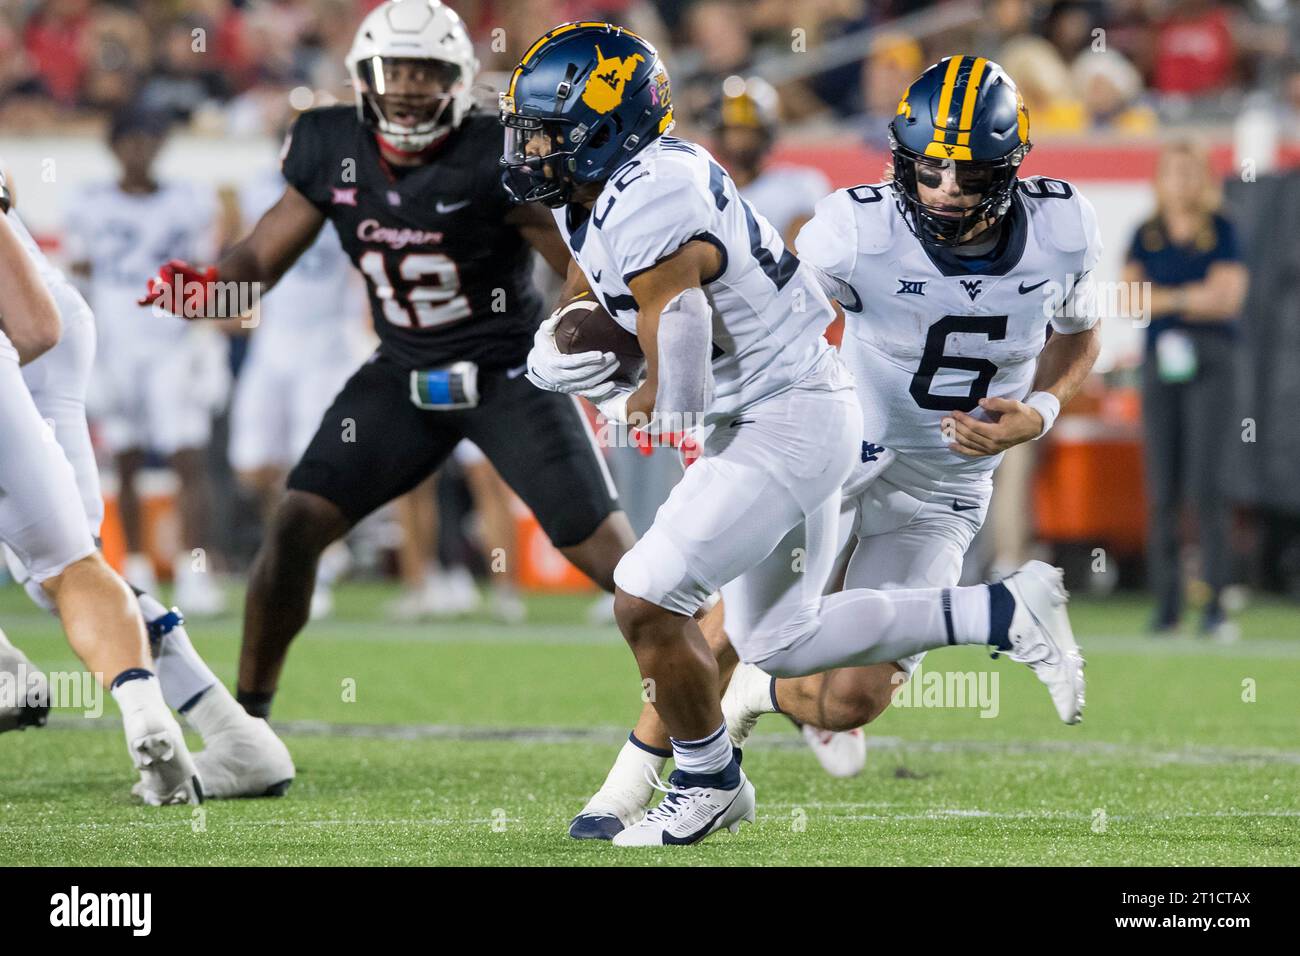 Houston, TX, USA. 12th Oct, 2023. West Virginia Mountaineers running back Jahiem White (22) carries the ball after receiving the handoff from quarterback Garrett Greene (6) during a game between the West Virginia Mountaineers and the Houston Cougars in Houston, TX. Trask Smith/CSM/Alamy Live News Stock Photo